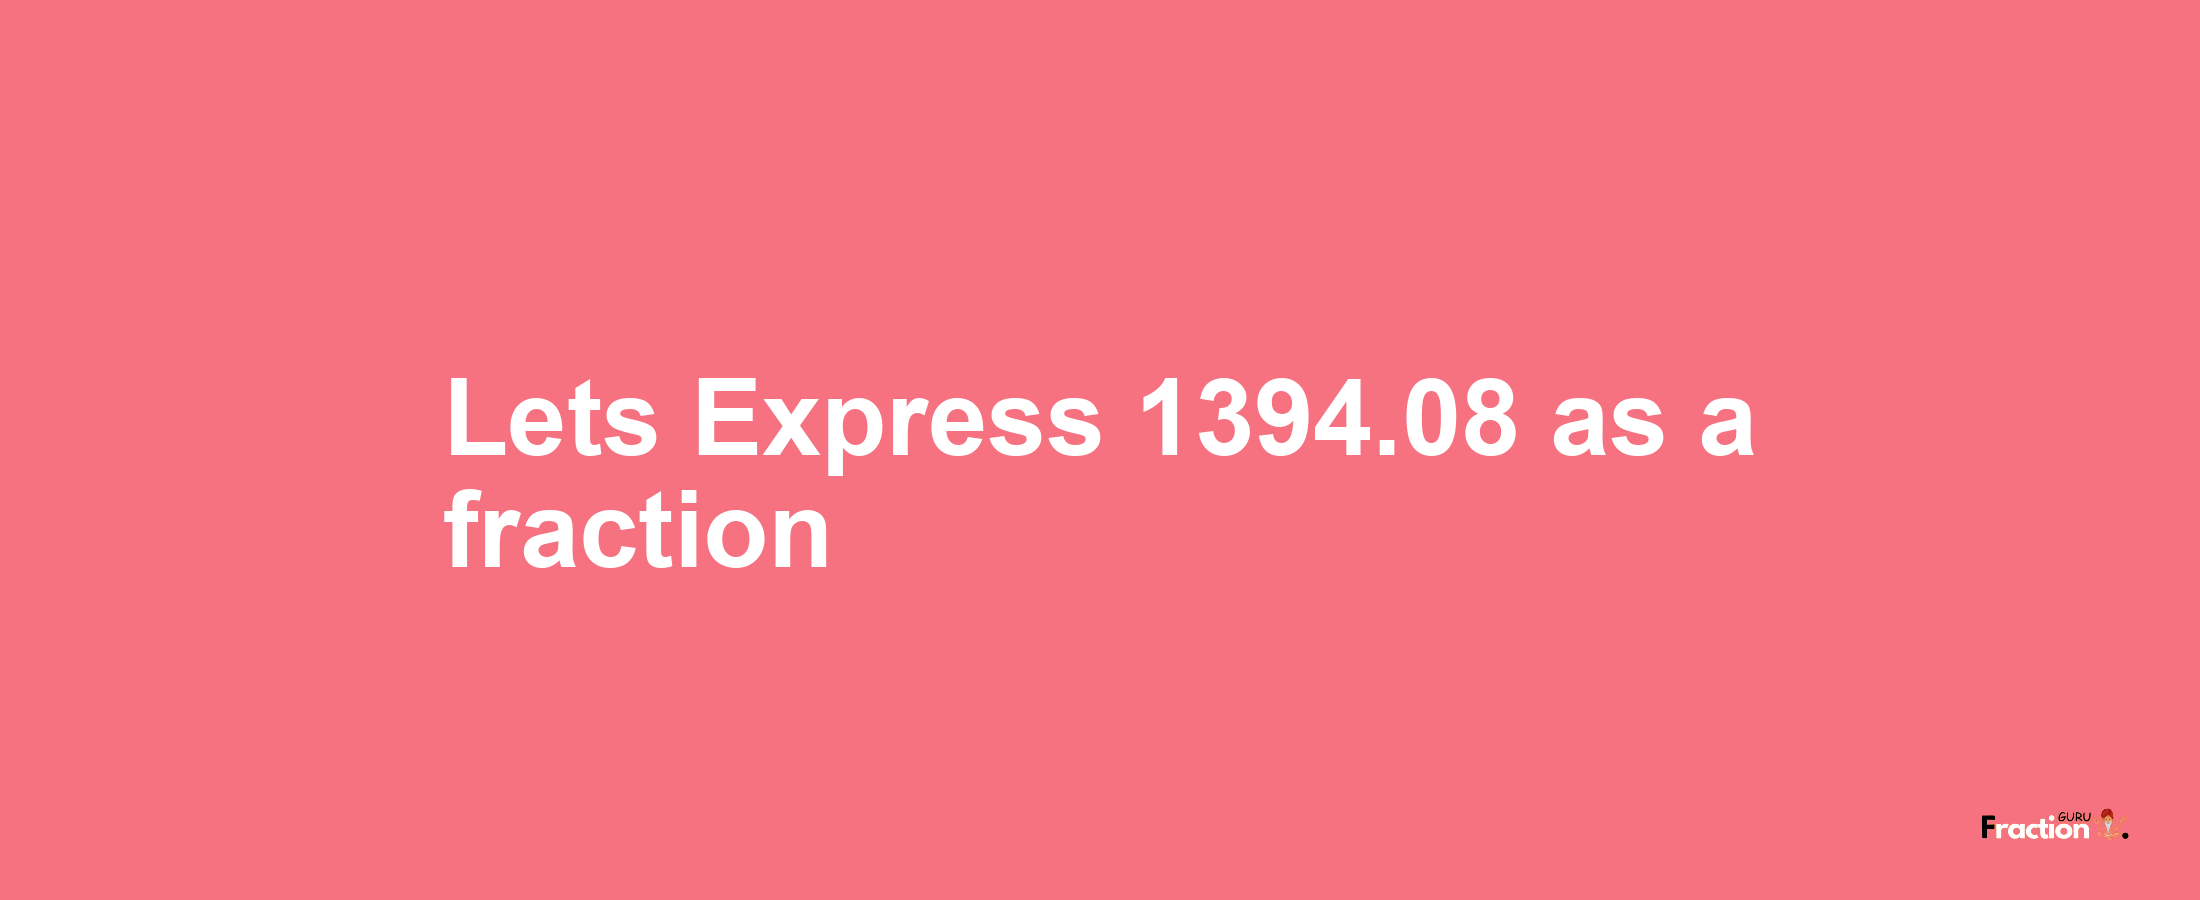 Lets Express 1394.08 as afraction